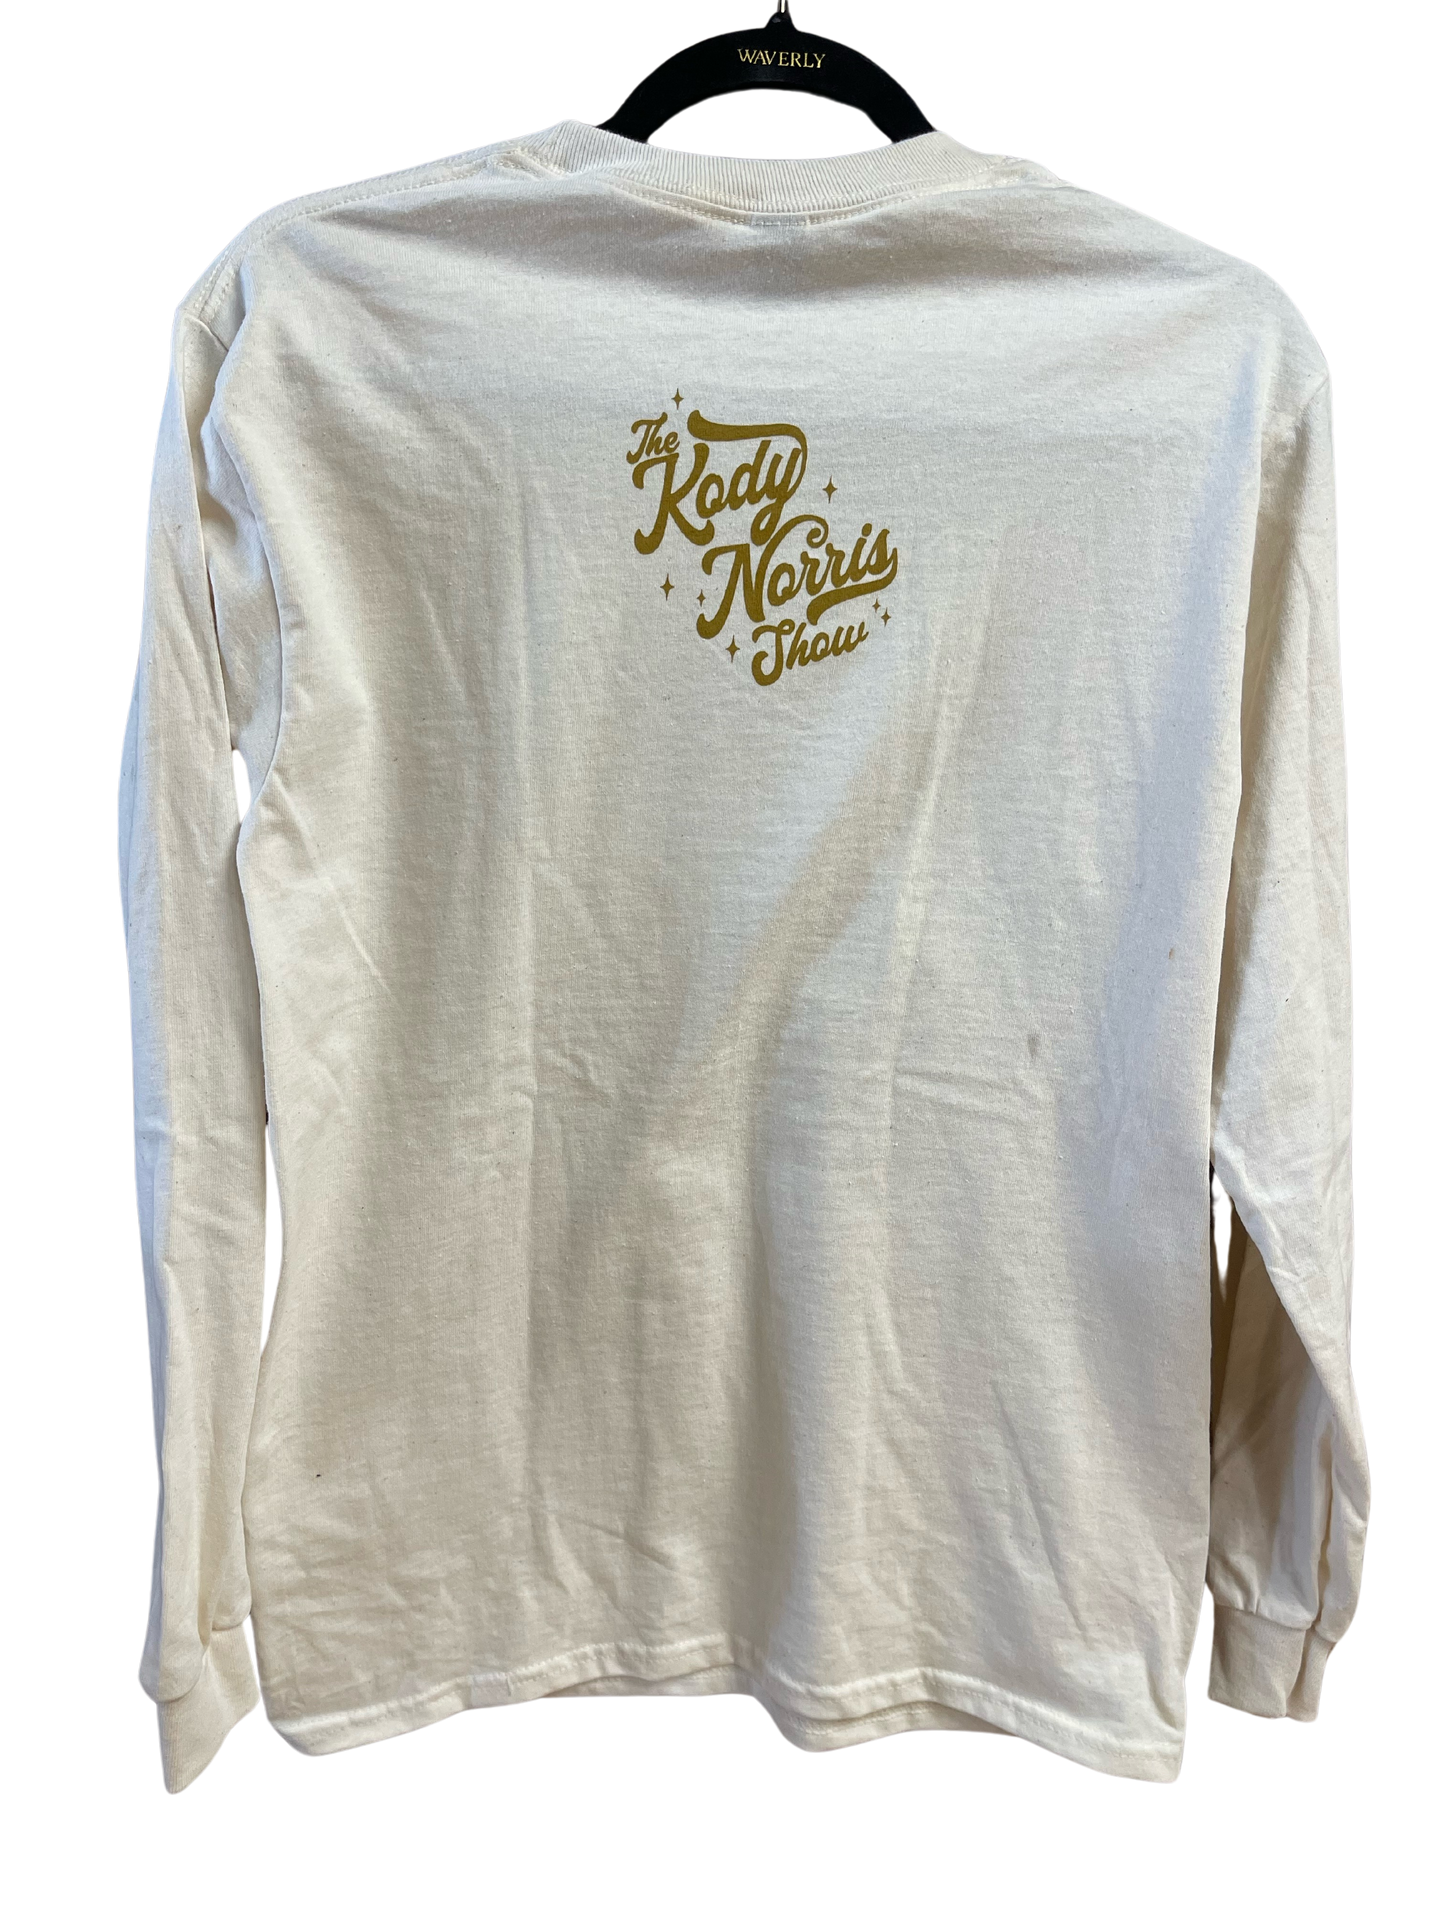 The Kody Norris Show Graphic Tee (Long Sleeve, Color Natural)  Natural with Gold Lettering  on the front and back Long Sleeve Gildan.